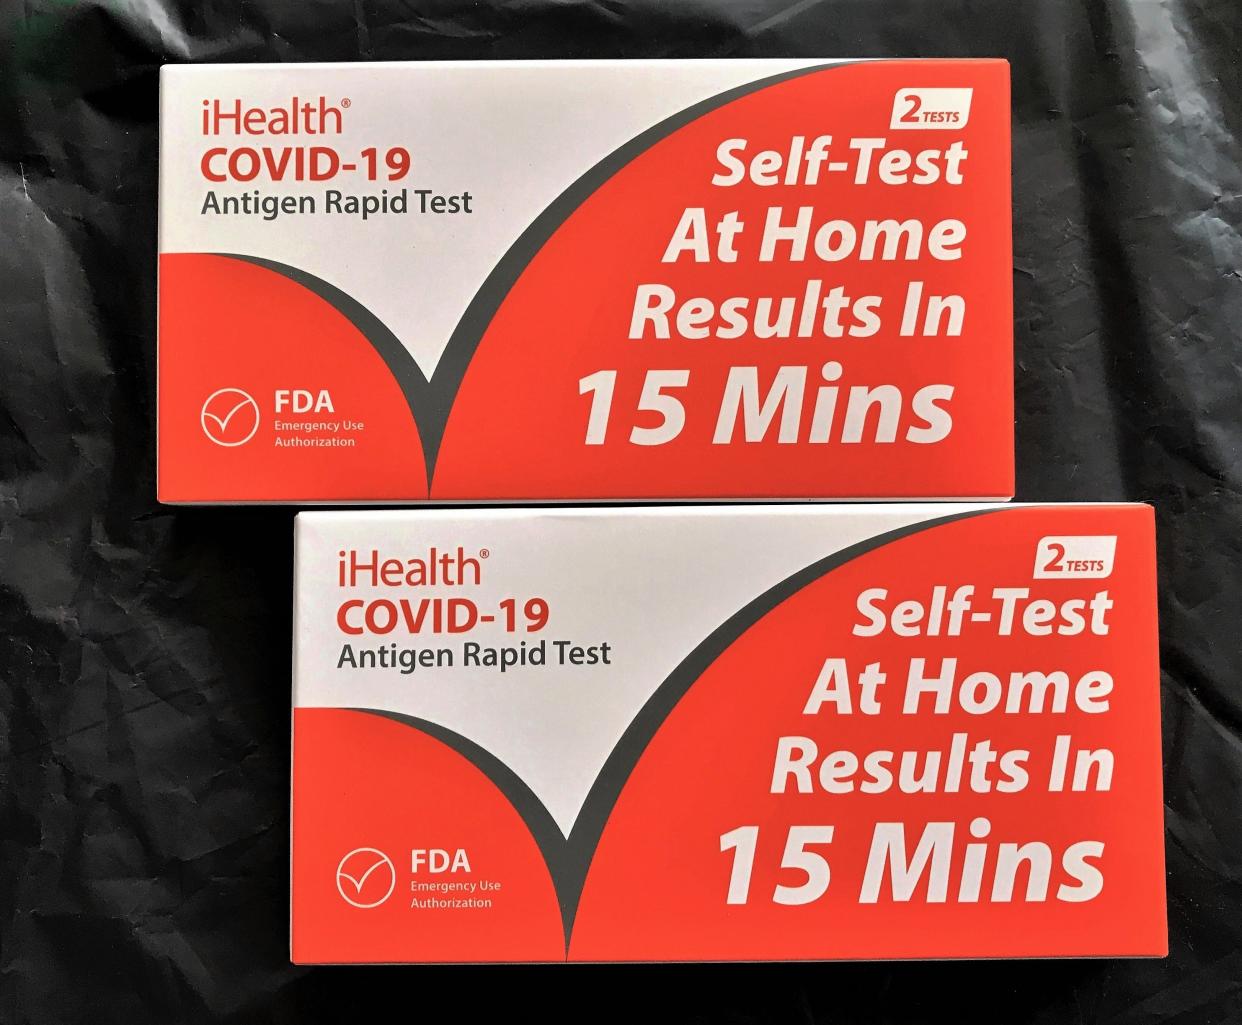 Free at-home COVID-19 test kits are available from the U.S. government at www.covidtests.gov/.